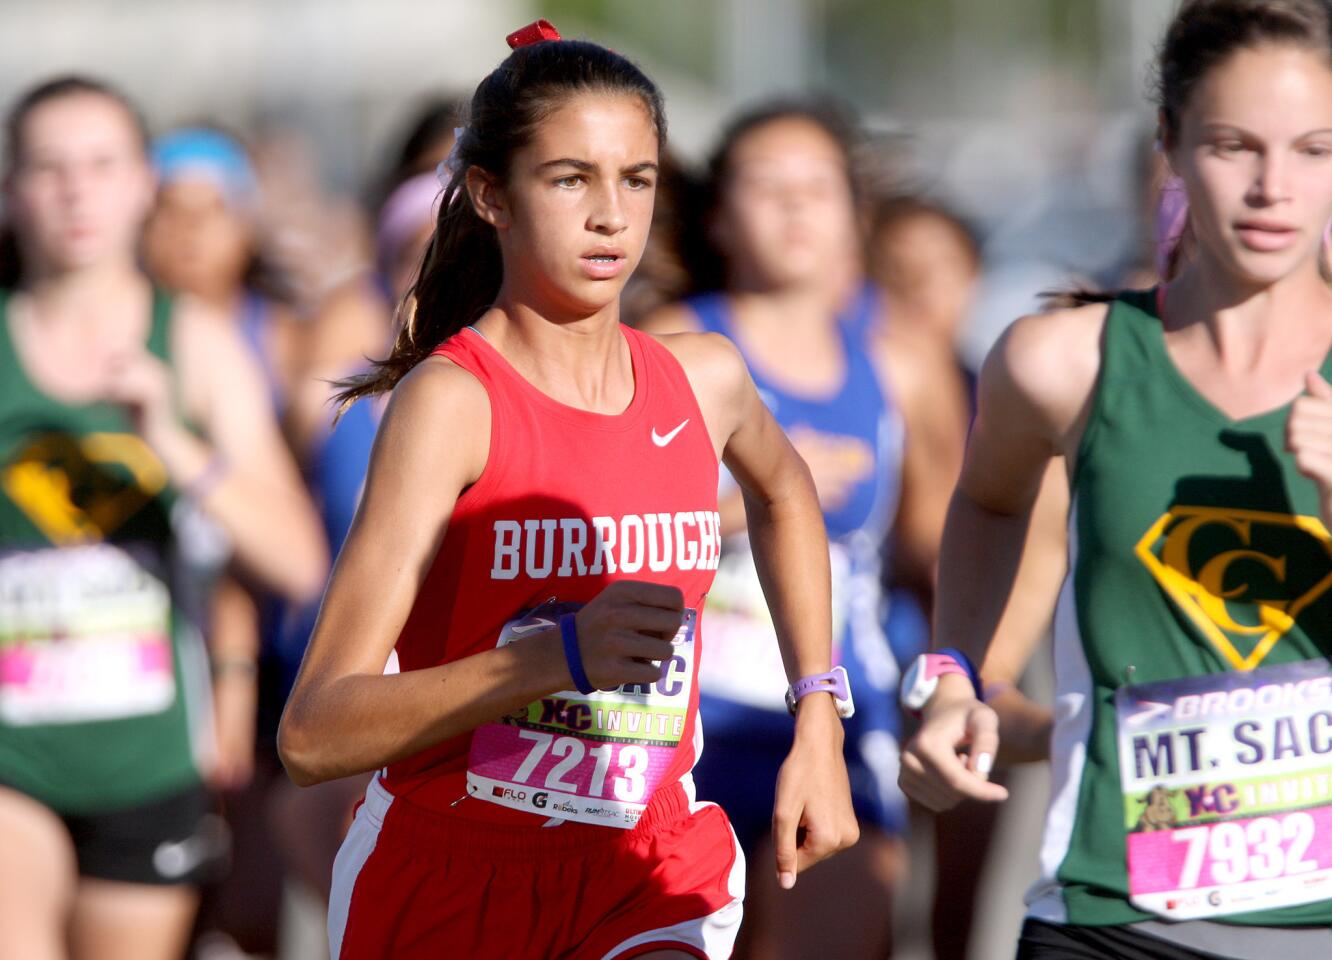 Burroughs High School's Emily Virtue won 3rd place in the girl's varsity high school division 1 & 2 individual sweepstakes blue wristband race at the 68th annual Mt. SAC Cross Country Invitational in Walnut on Saturday, October 24, 2015.